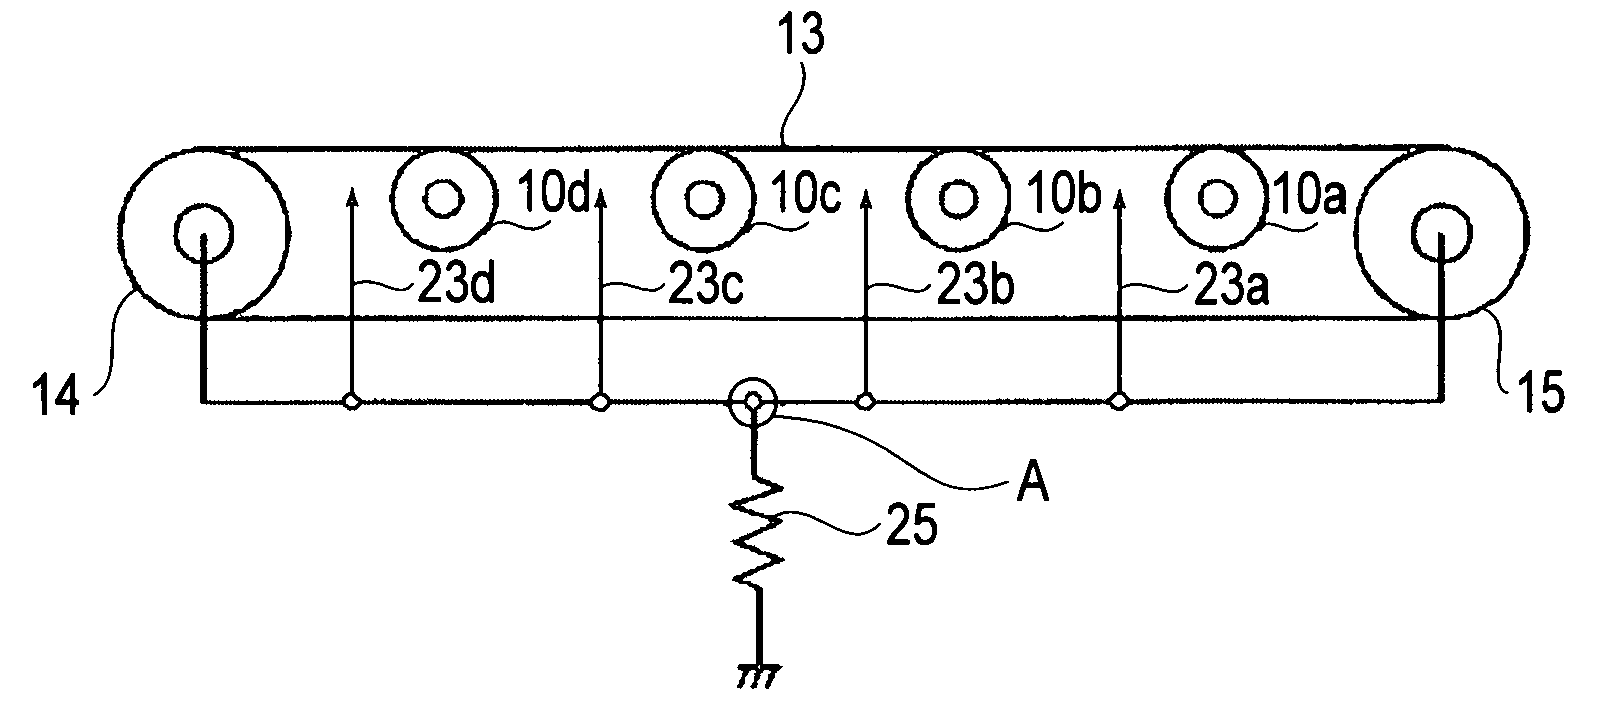 Image forming apparatus including first and second charge removing members connected to a grounding point